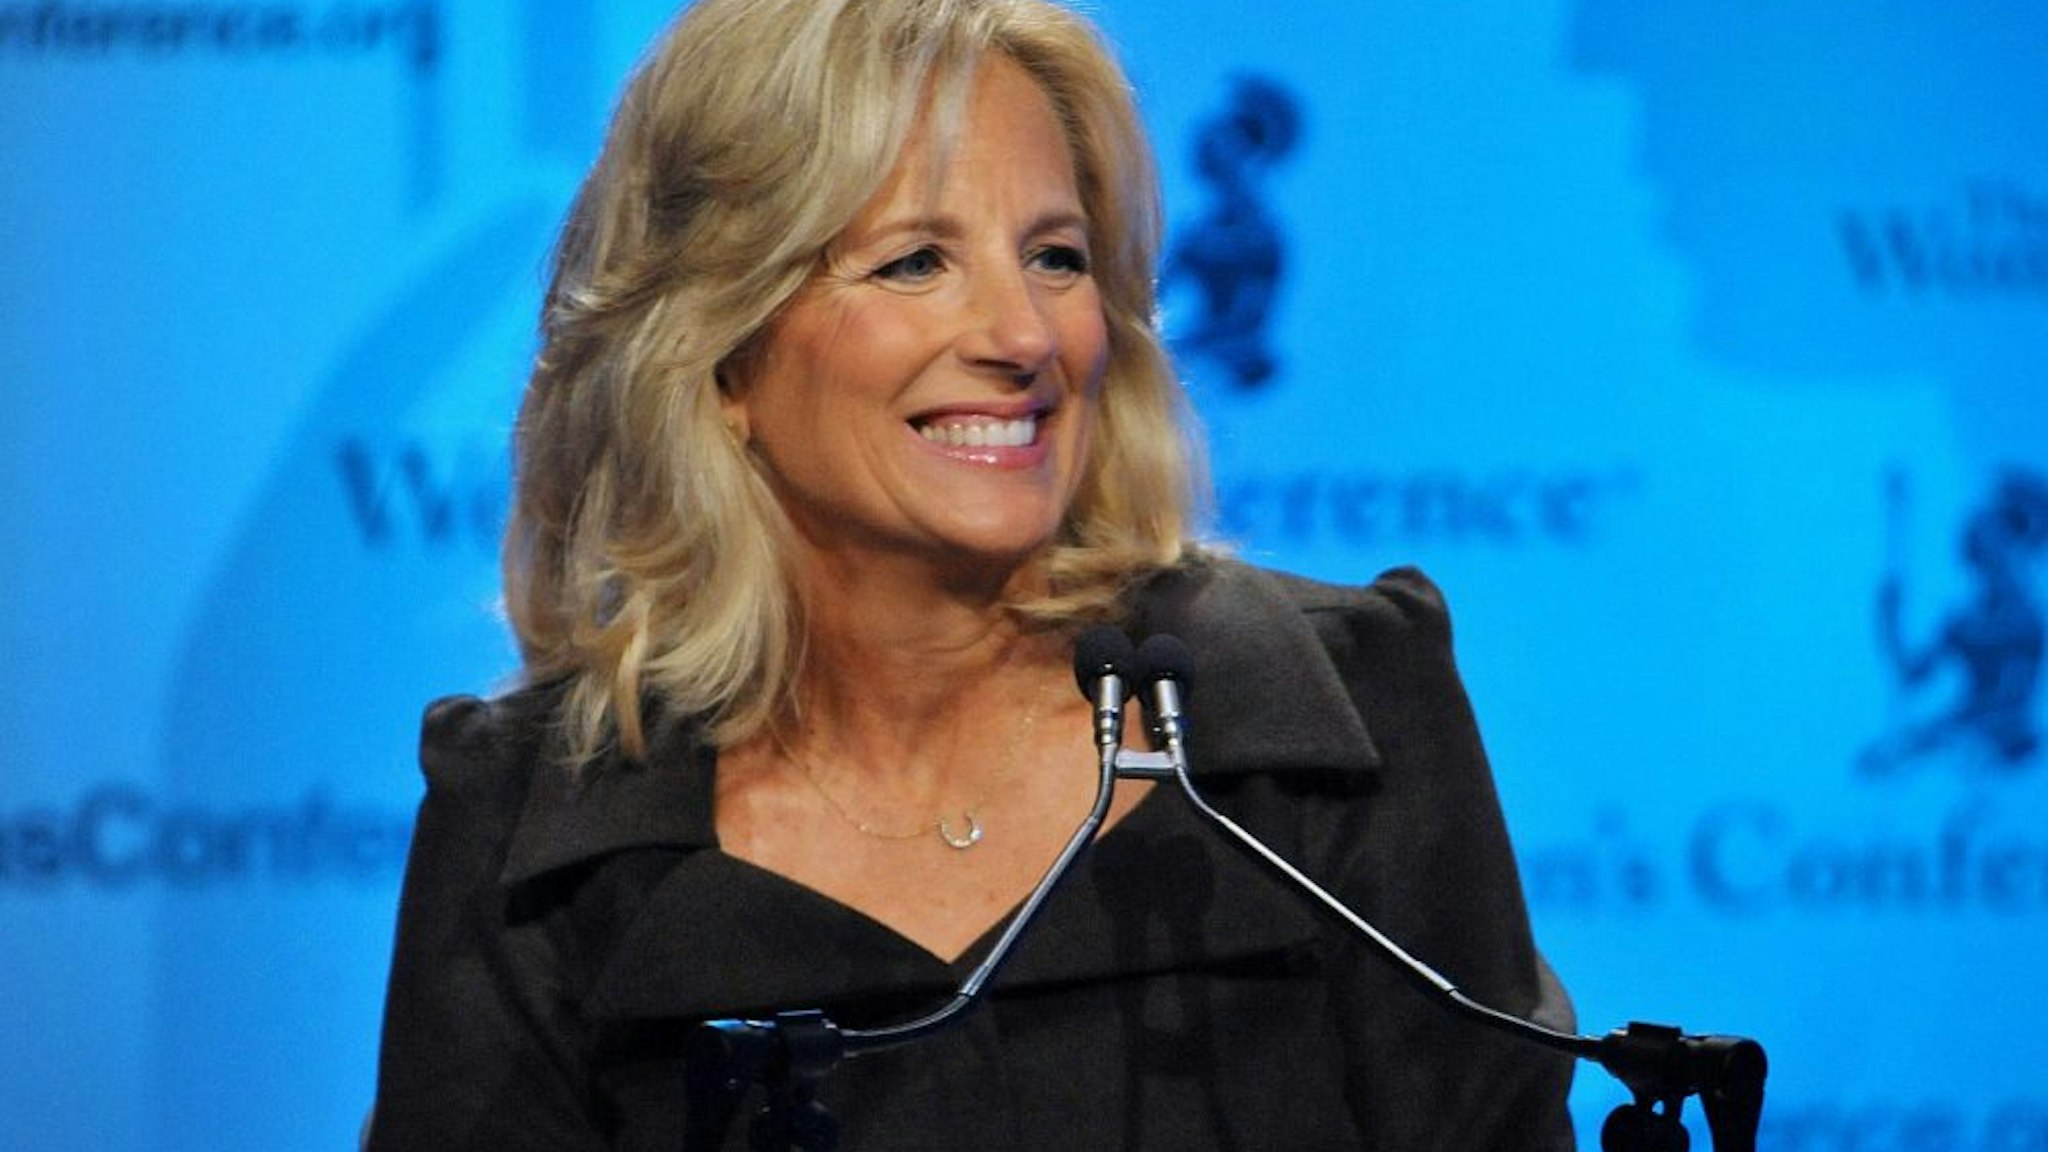 Second Lady Dr. Jill Biden speaks on day 3 of Maria Shriver's Women's Conference 2010 at the Long Beach Convention Center on October 26, 2010 in Long Beach, California.